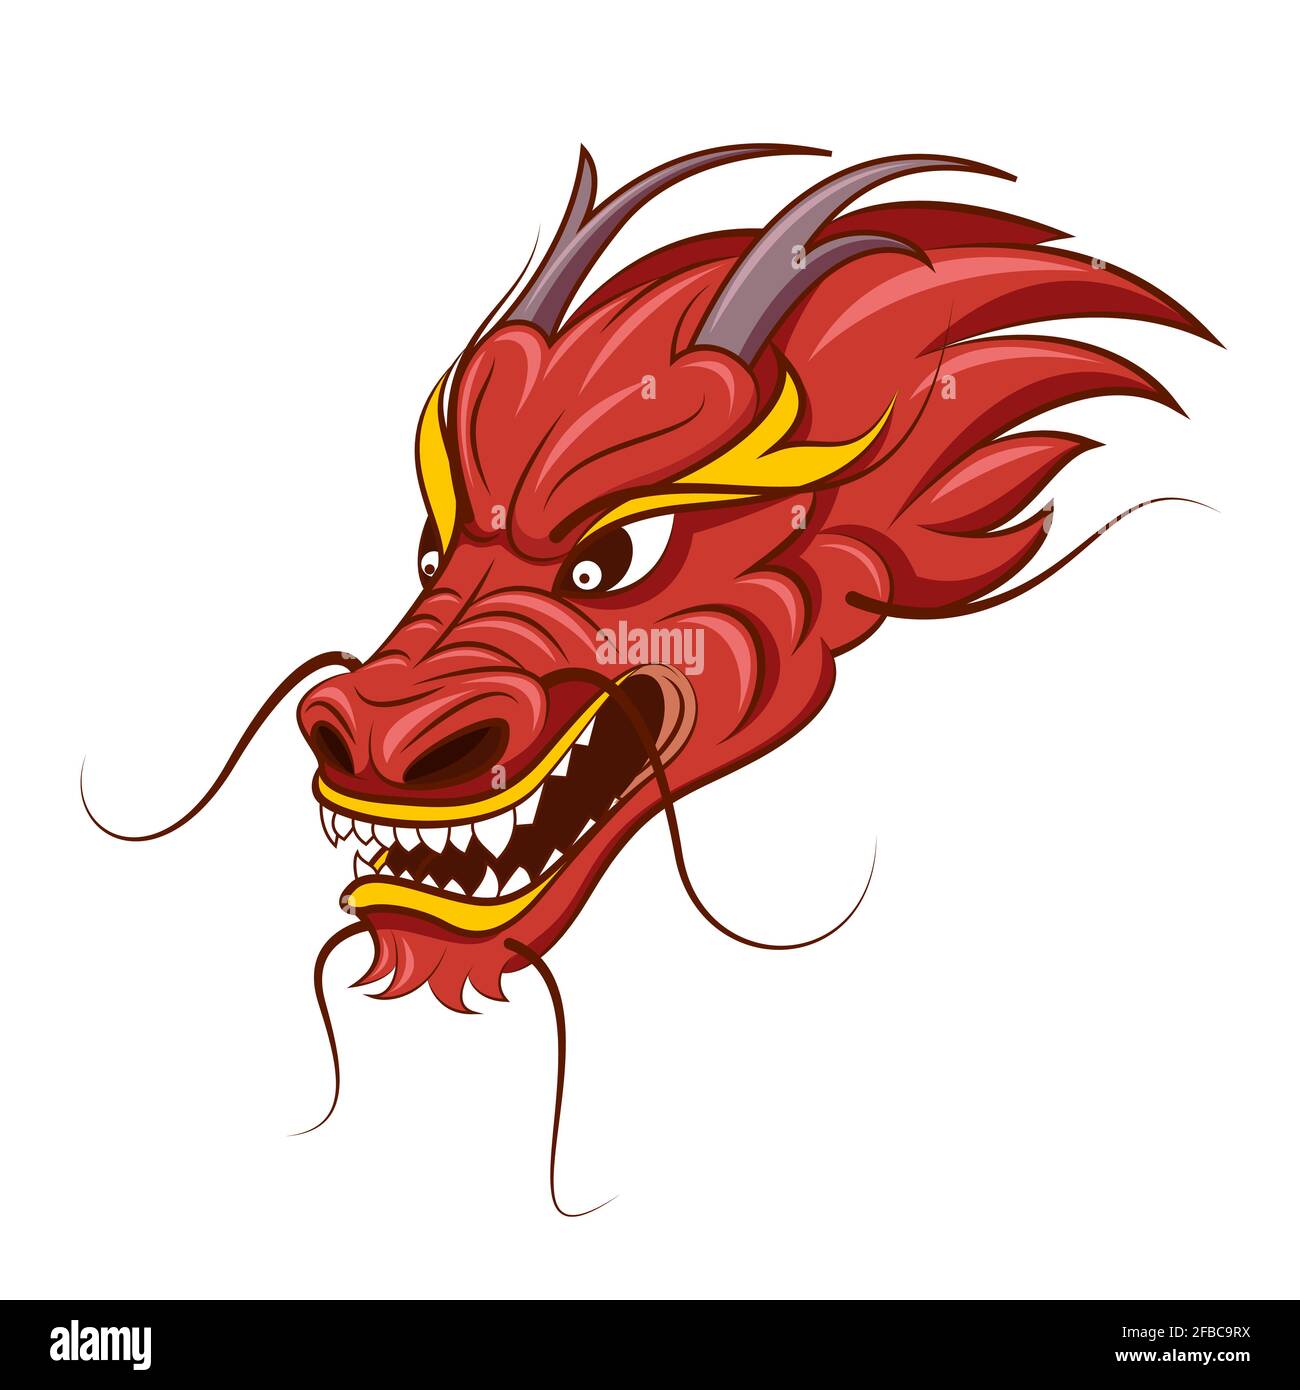 Chinese dragon vector illustration. Tattoo of red dragon, head of traditional dragon Stock Vector